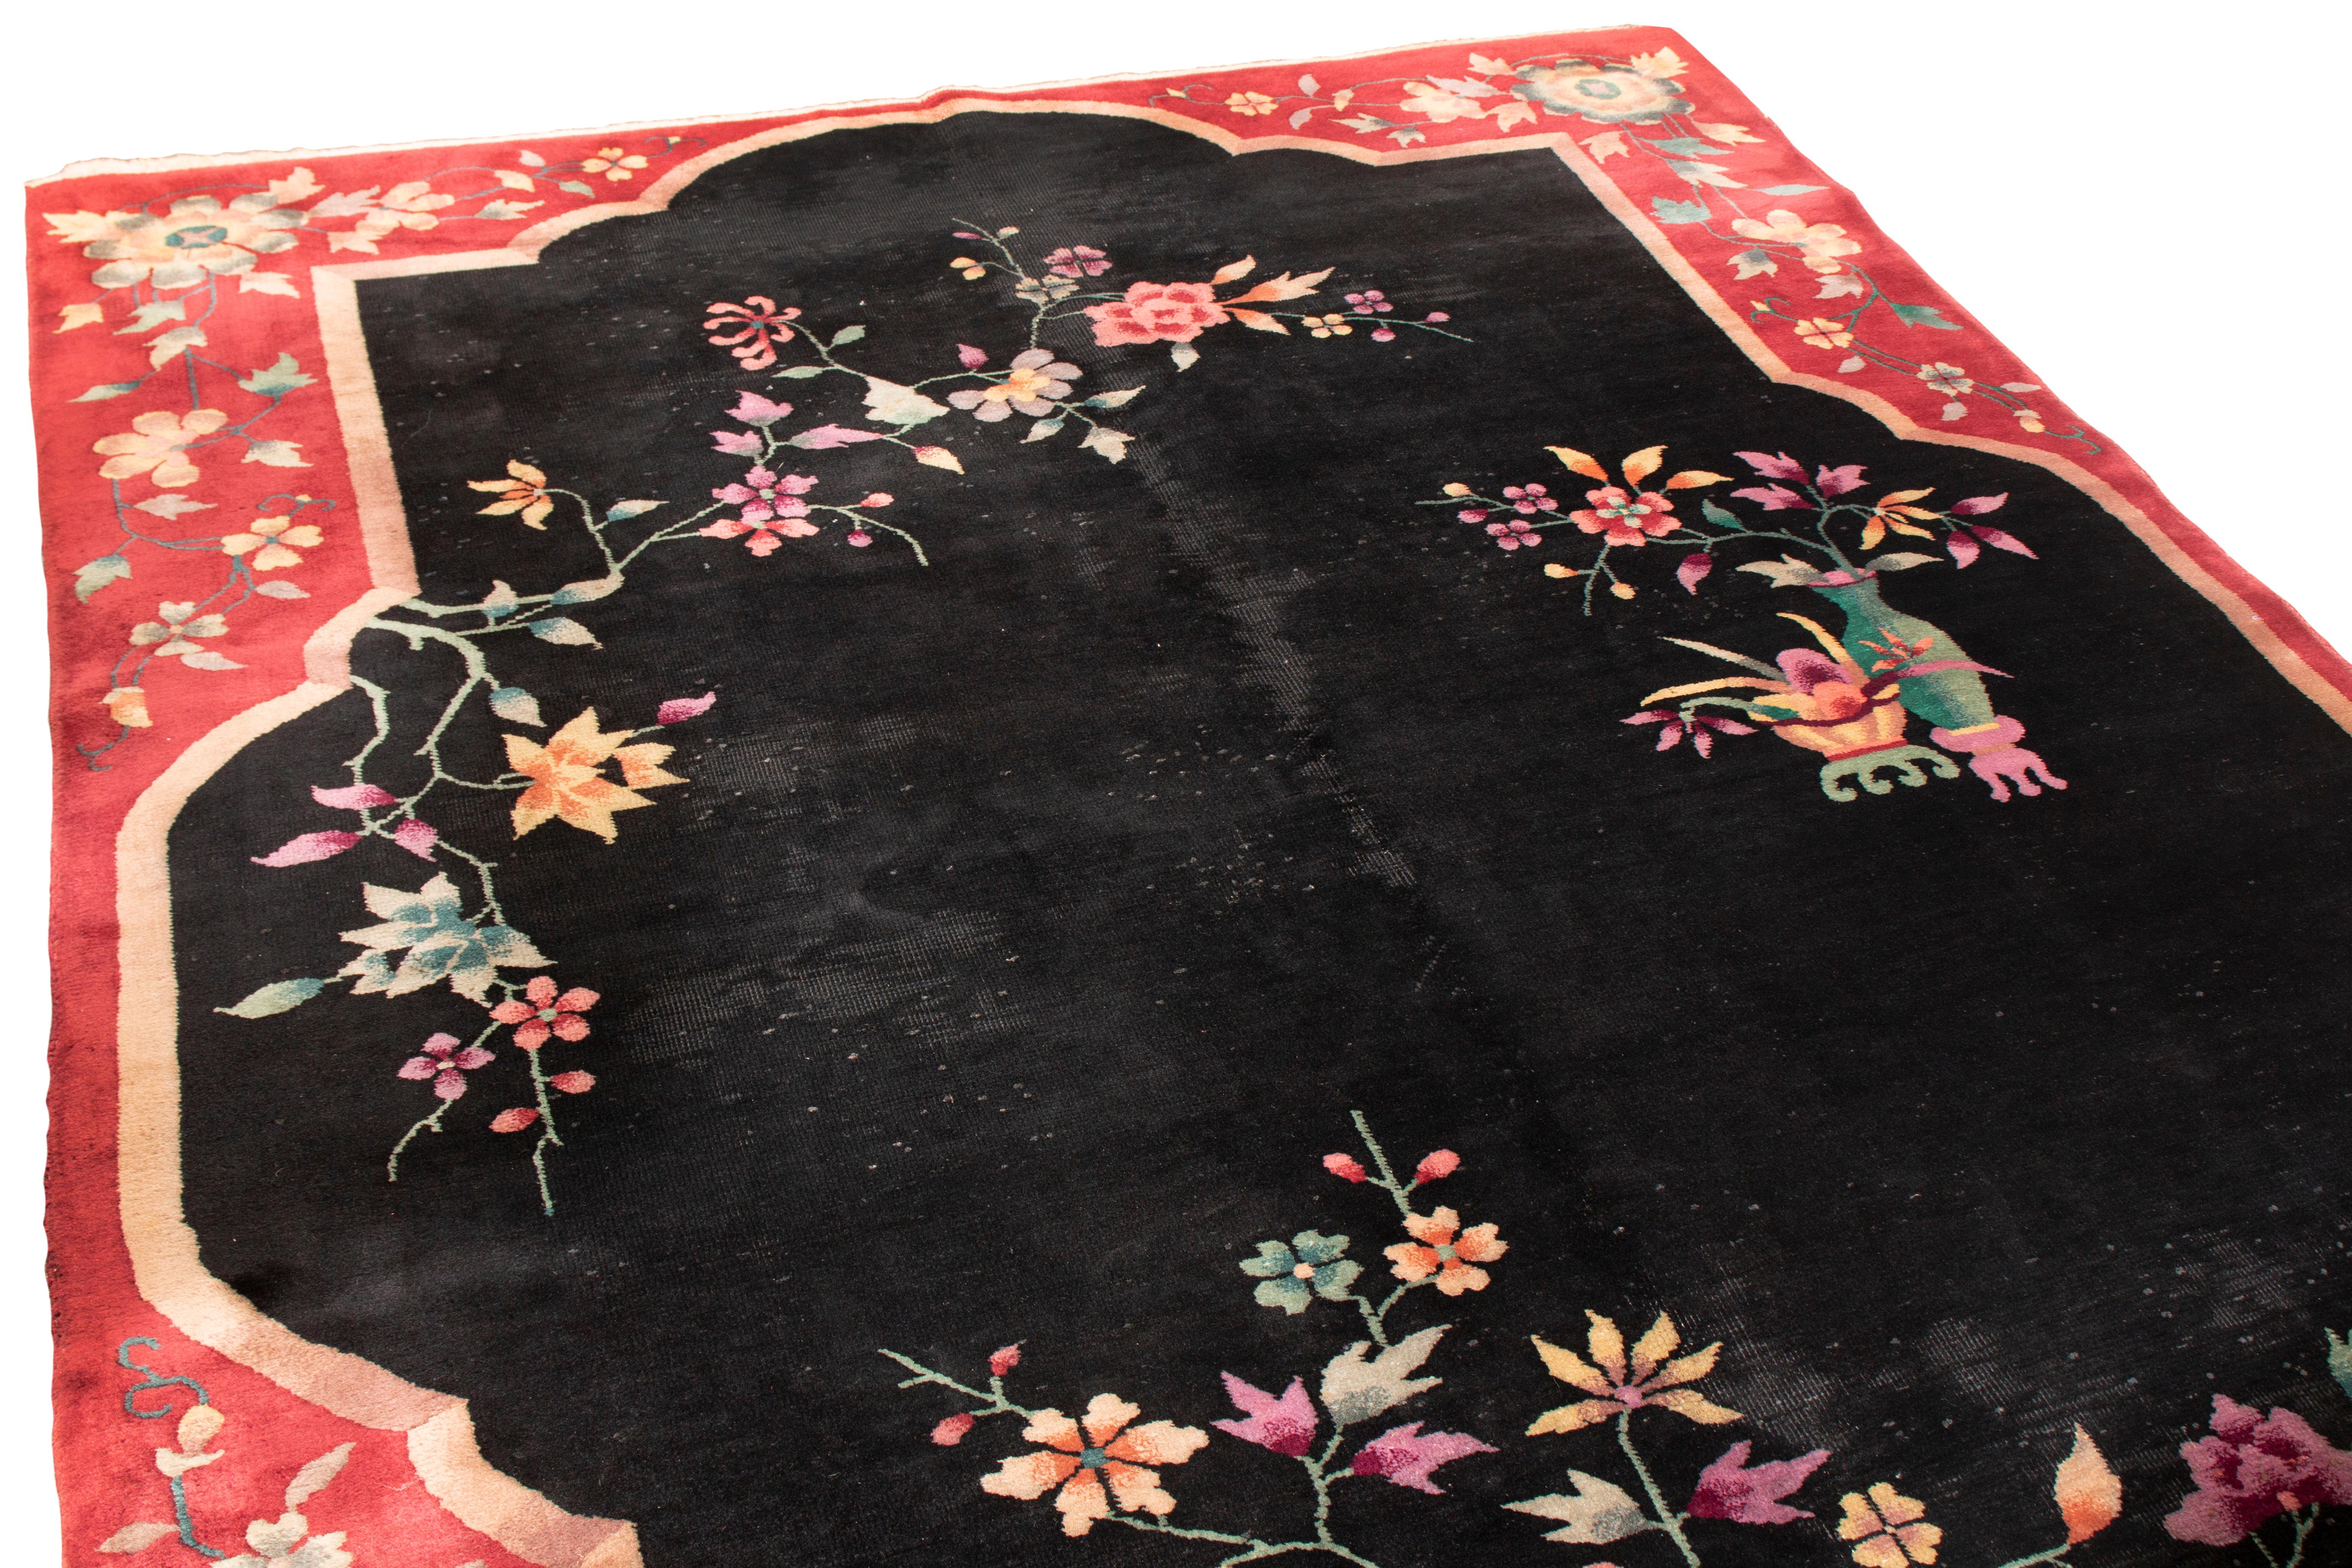 This vintage Chinese wool rug from Rug & Kilim has a traditional style with influences from other vintage families. Originating in China, the hyper-stylized floral patterns, symmetrical in the royal red border but almost one-sided in the black field